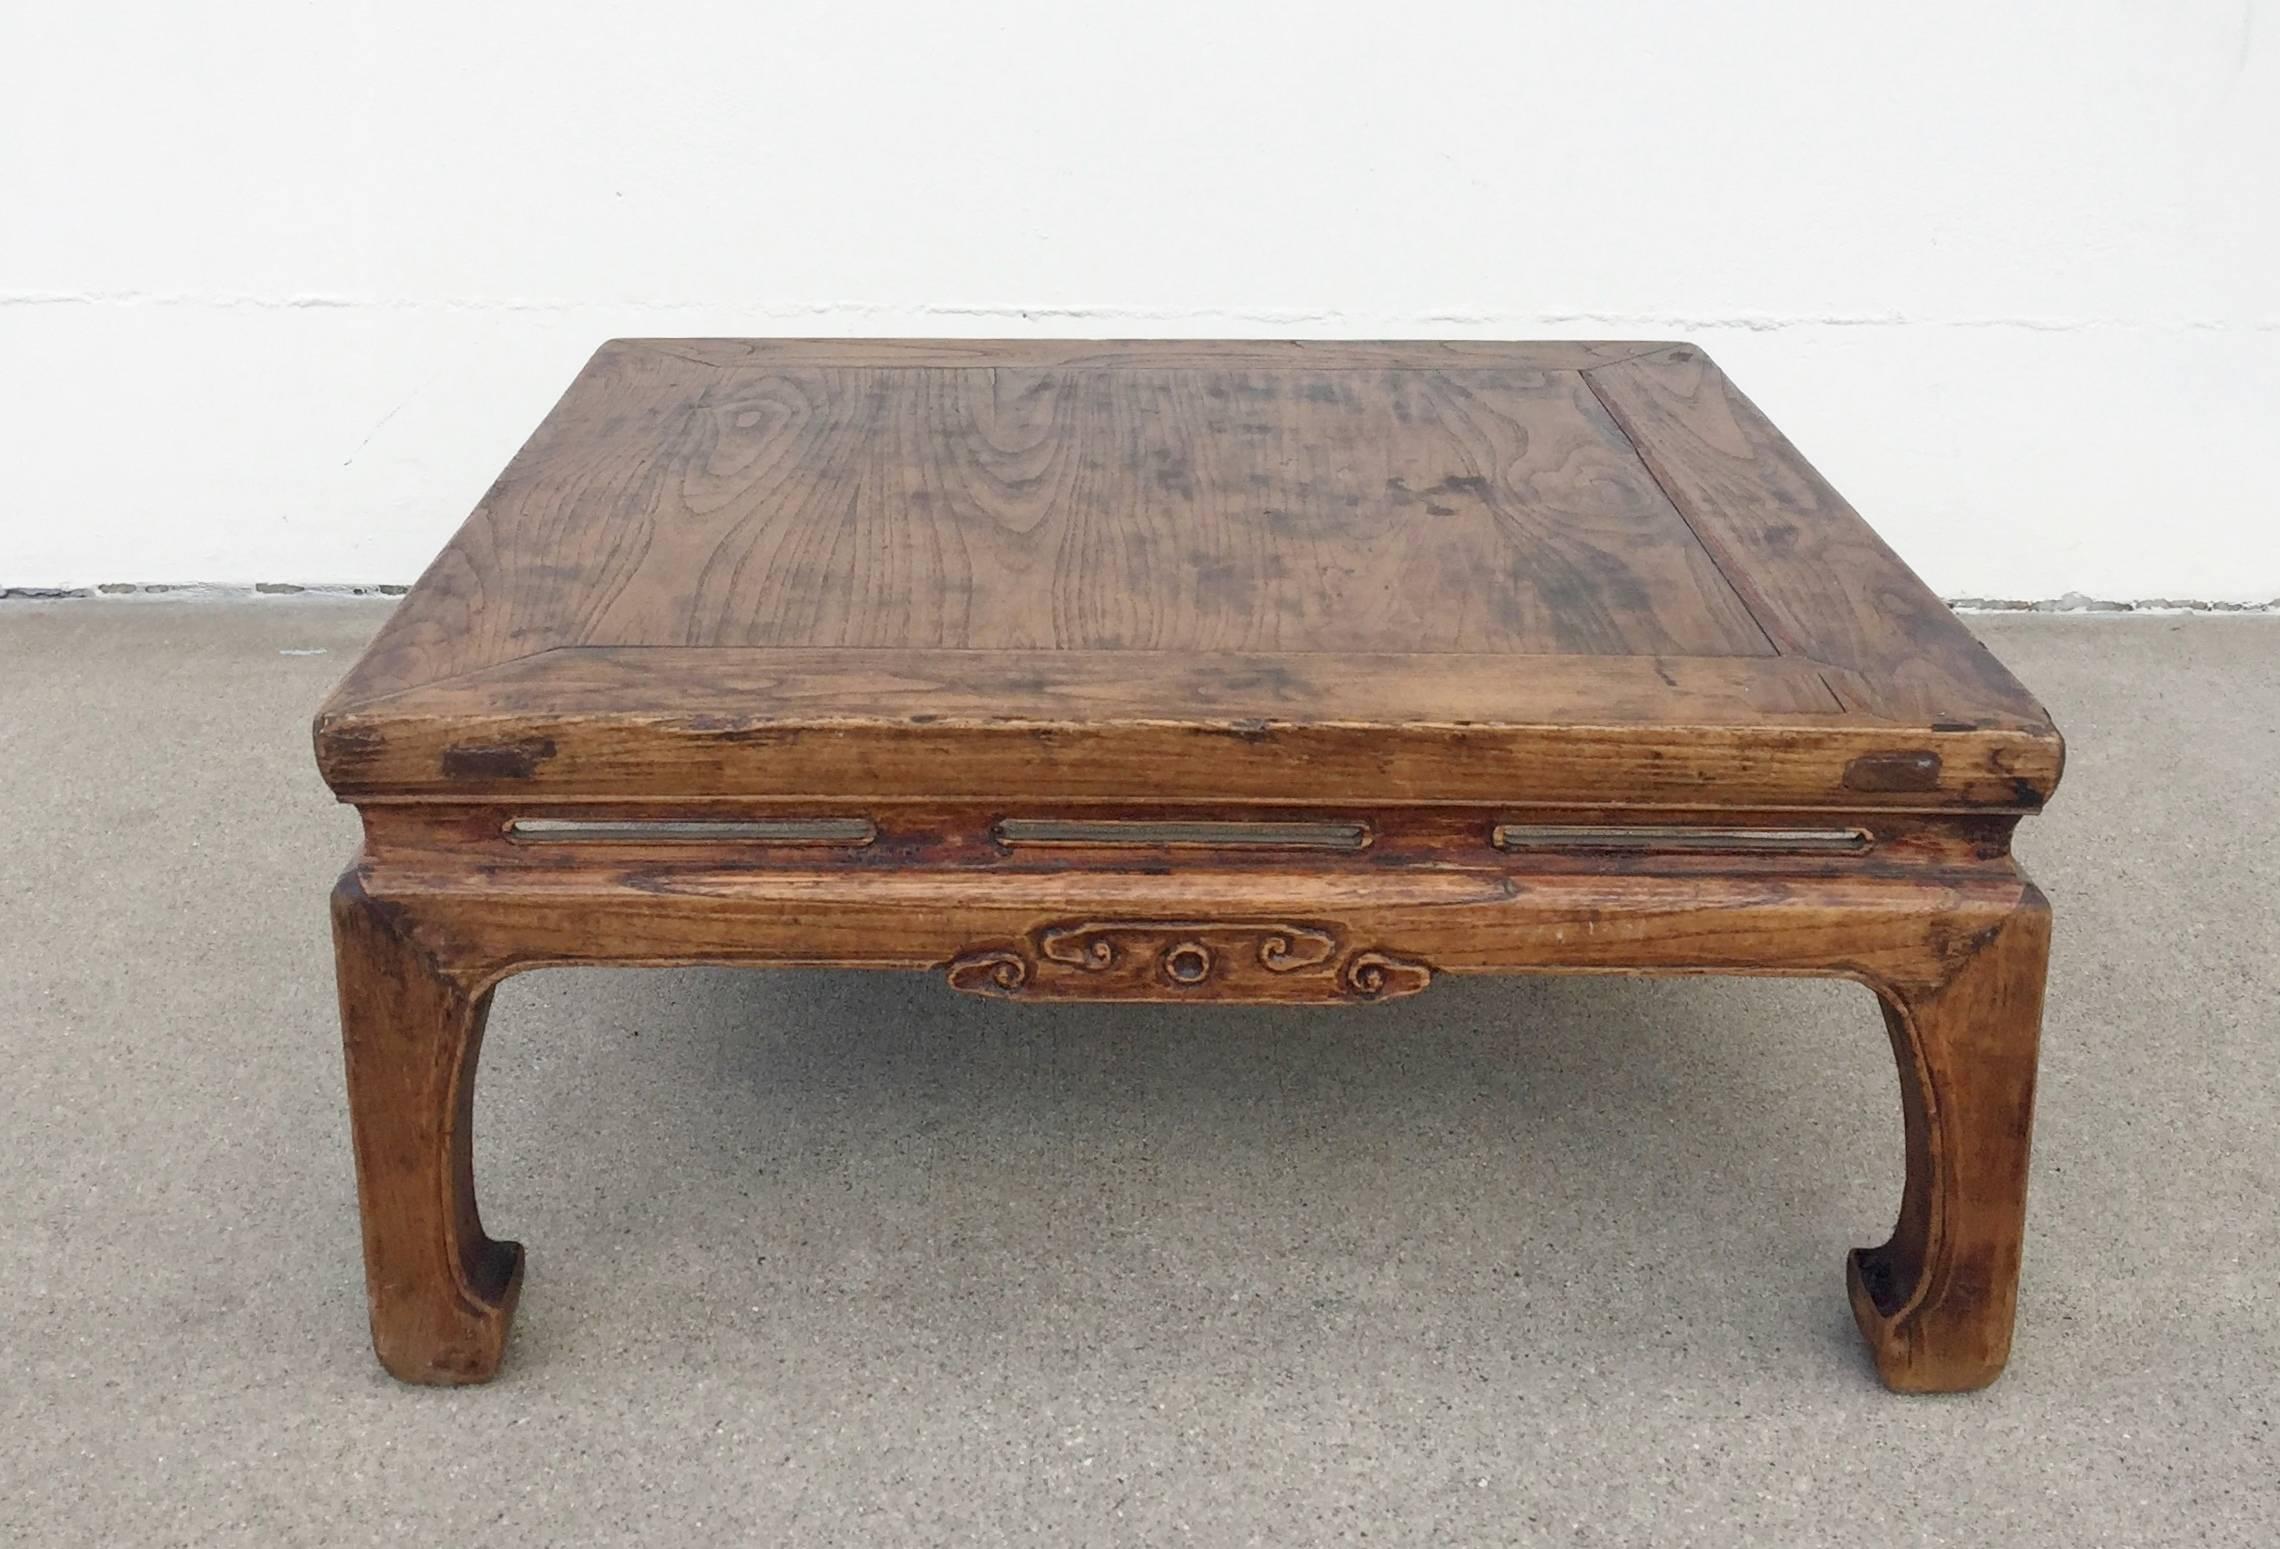 Hand-Carved Antique Chinese Low Table